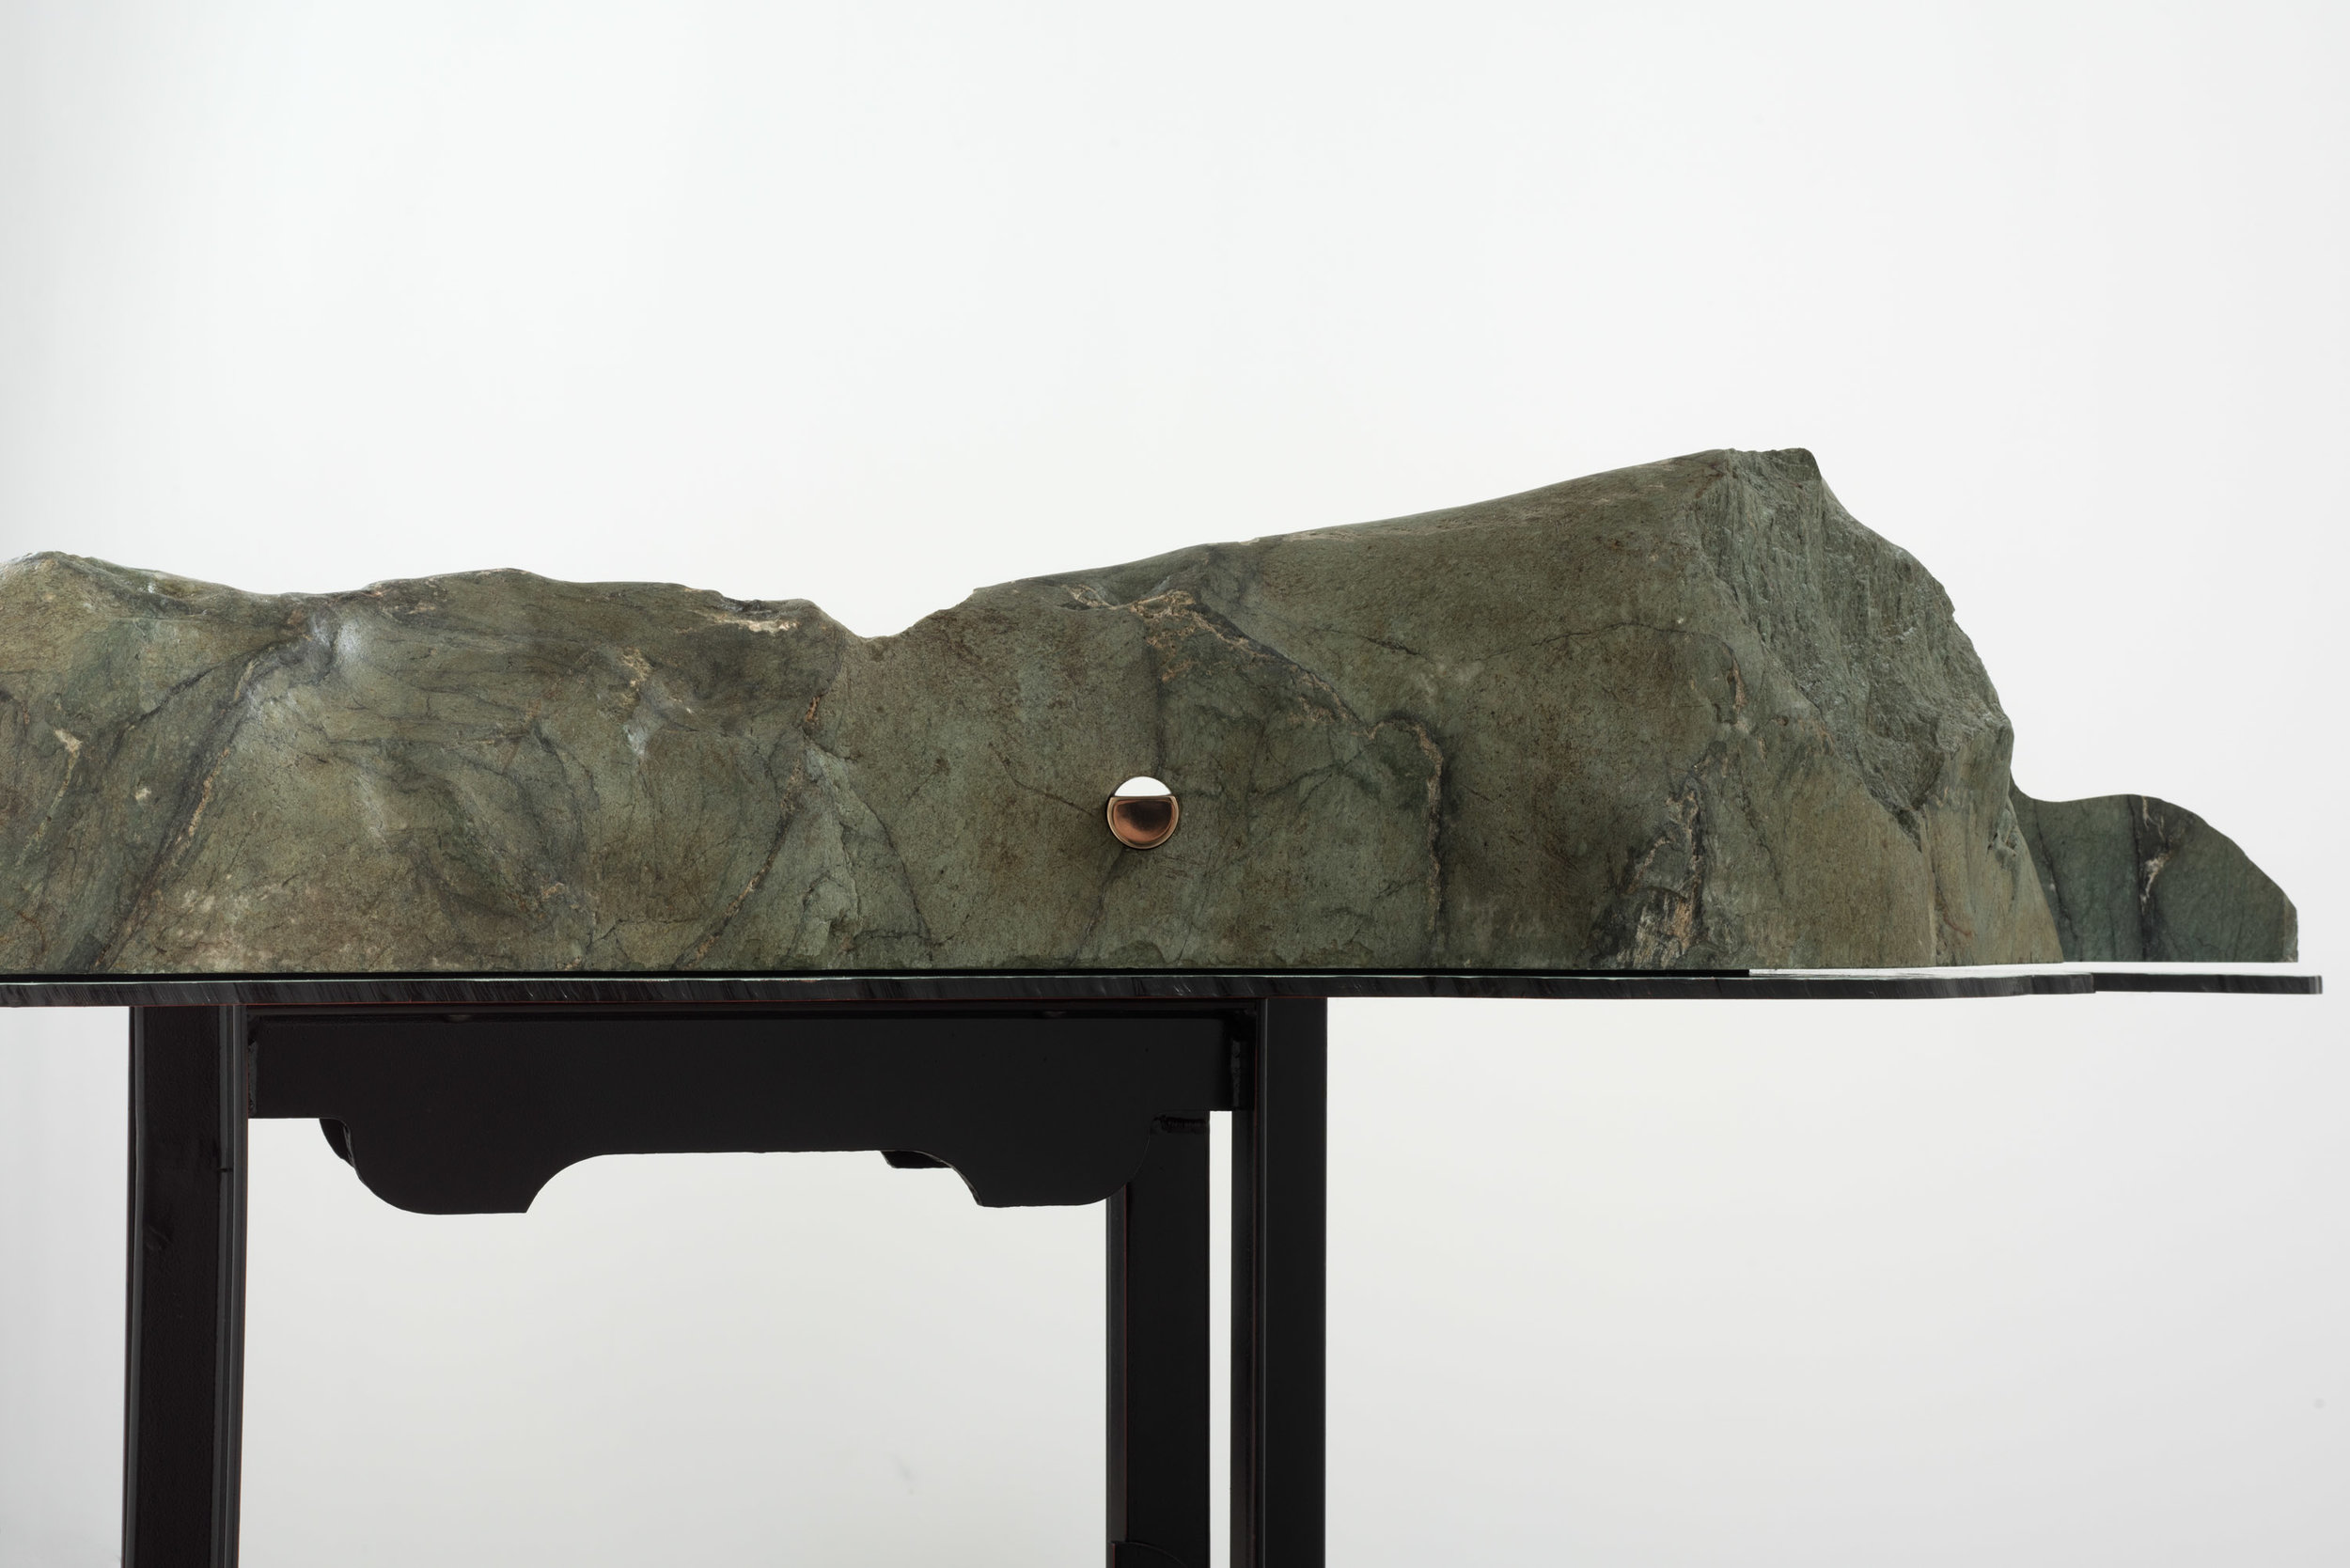   II Model of an Earth Fastener on the San Andreasm Fault , 2019 Steel, enamel, greenschist, and bronze 52 x 64 x 16 inches 